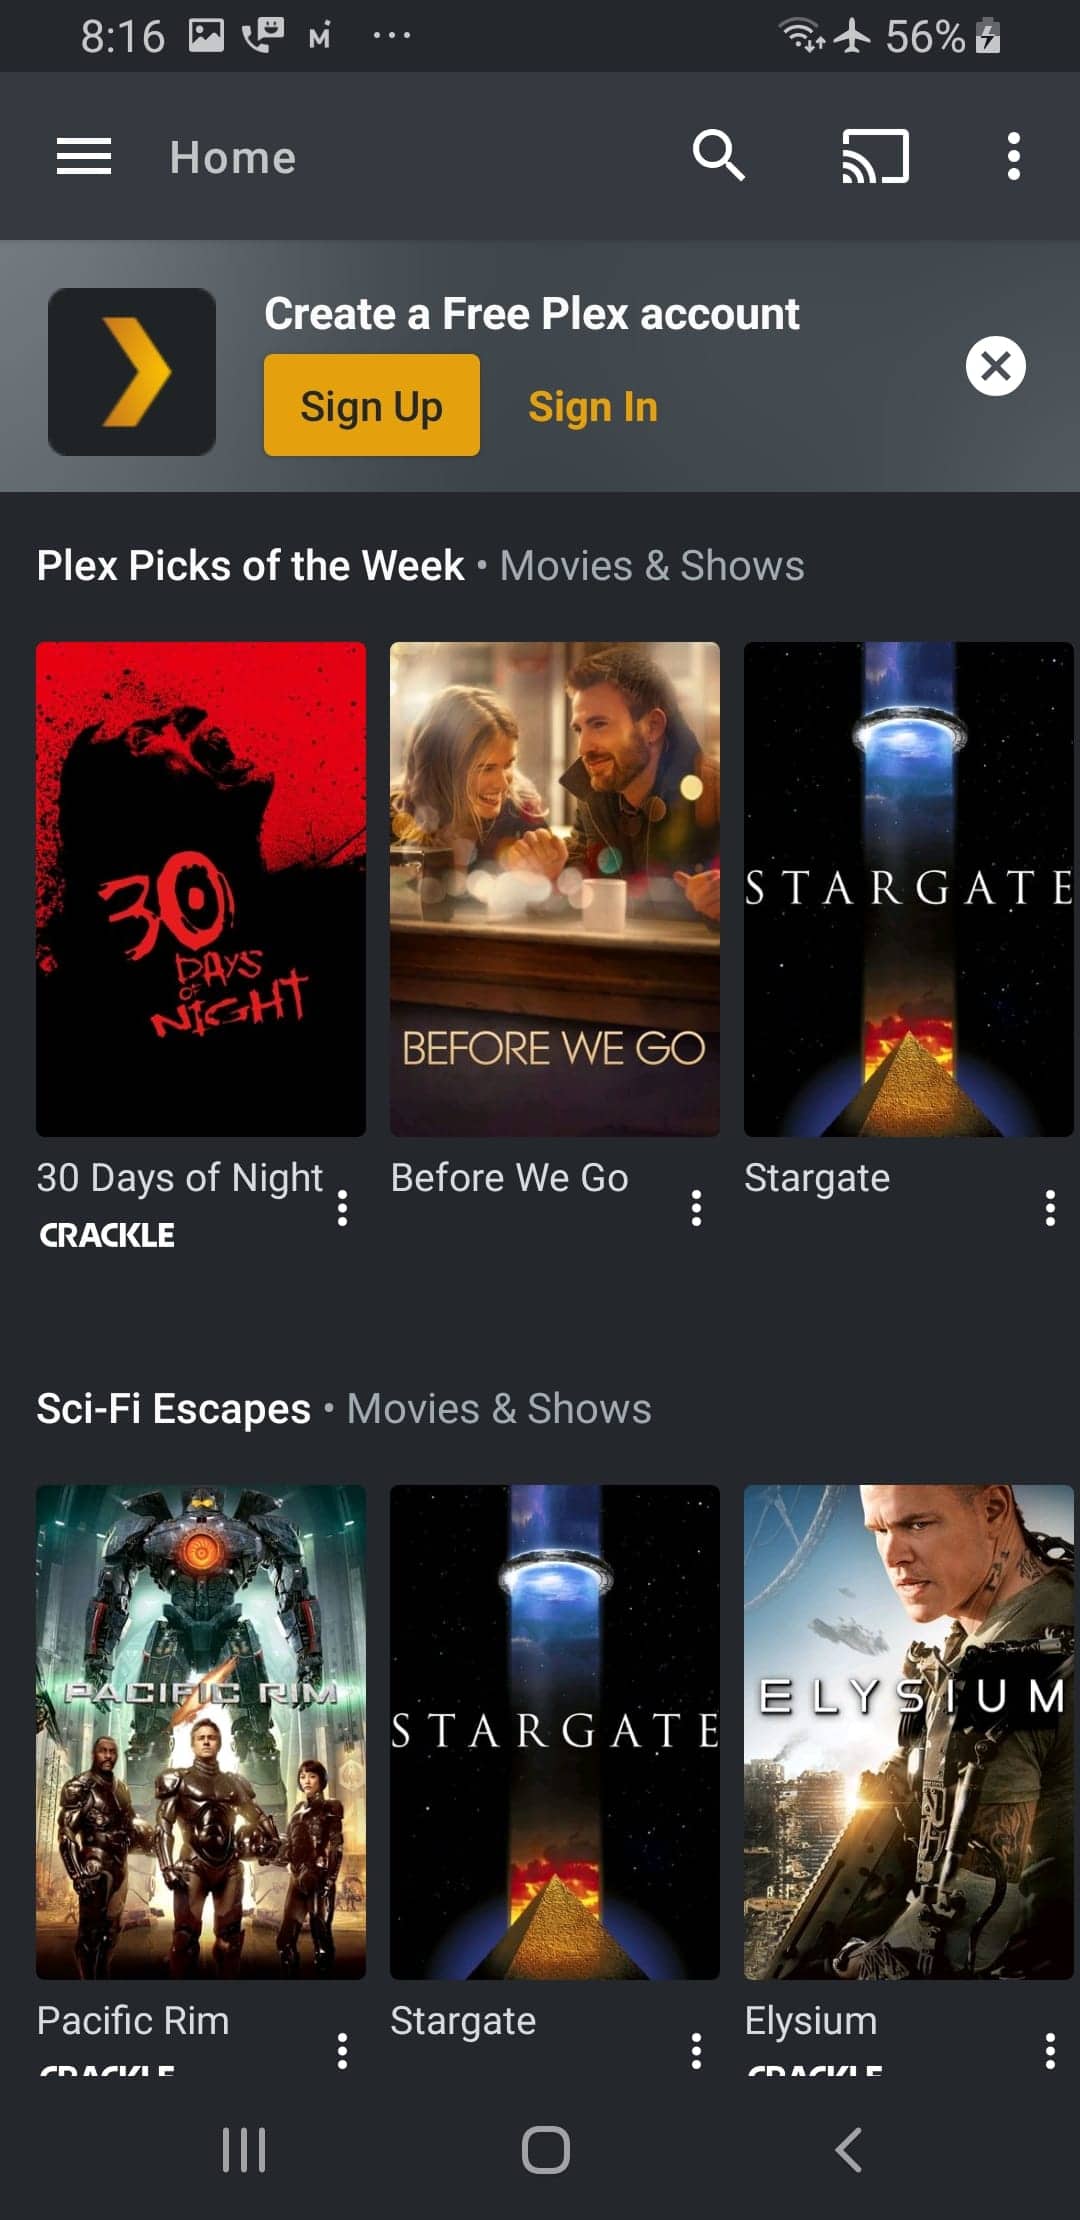 Screenshot From Our Plex Review